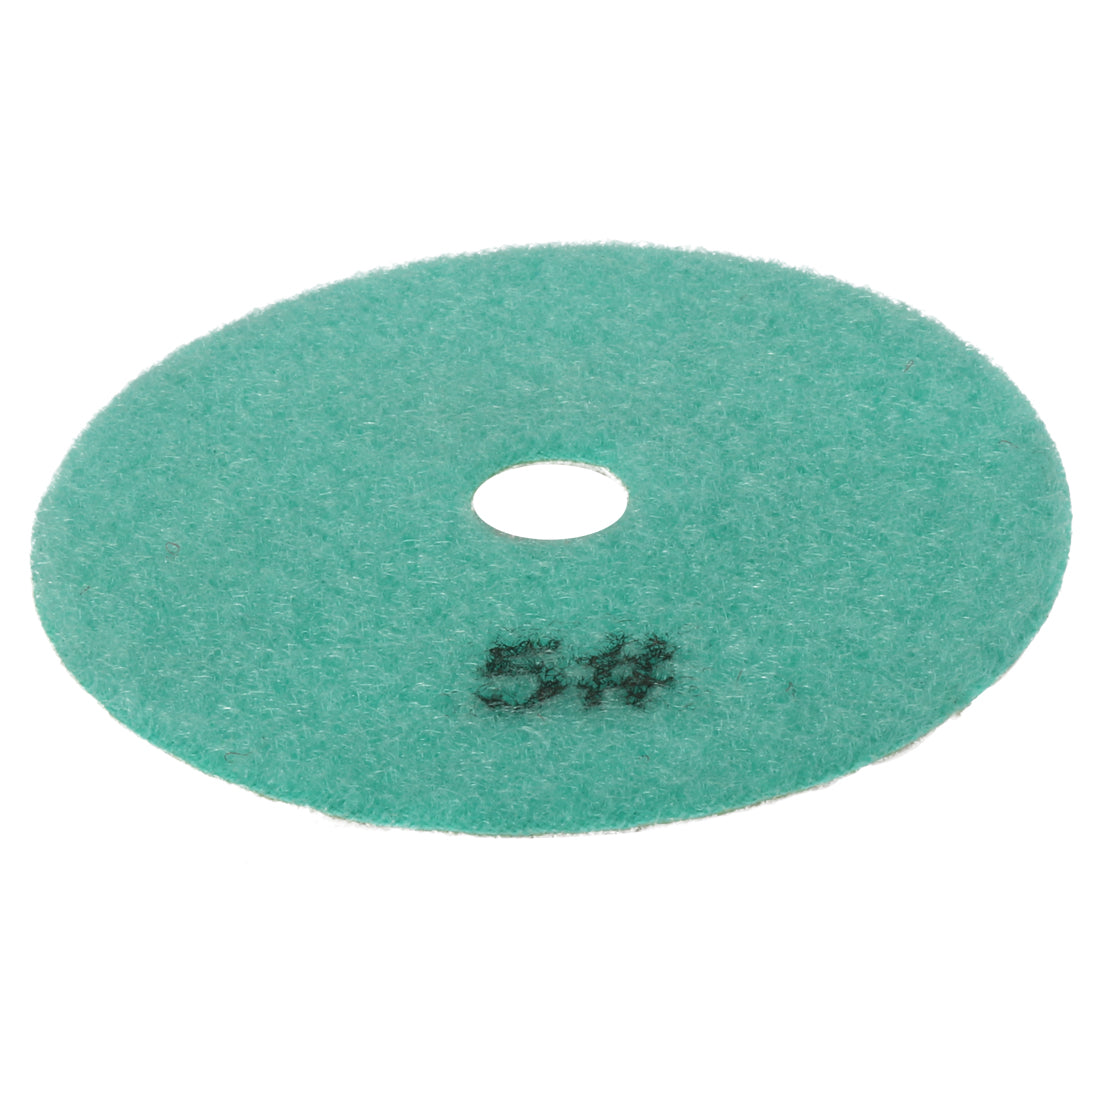 uxcell Uxcell 4-inch Diamond Dry Polishing Pad 5 in 1 for Sanding Marble Granite Stone